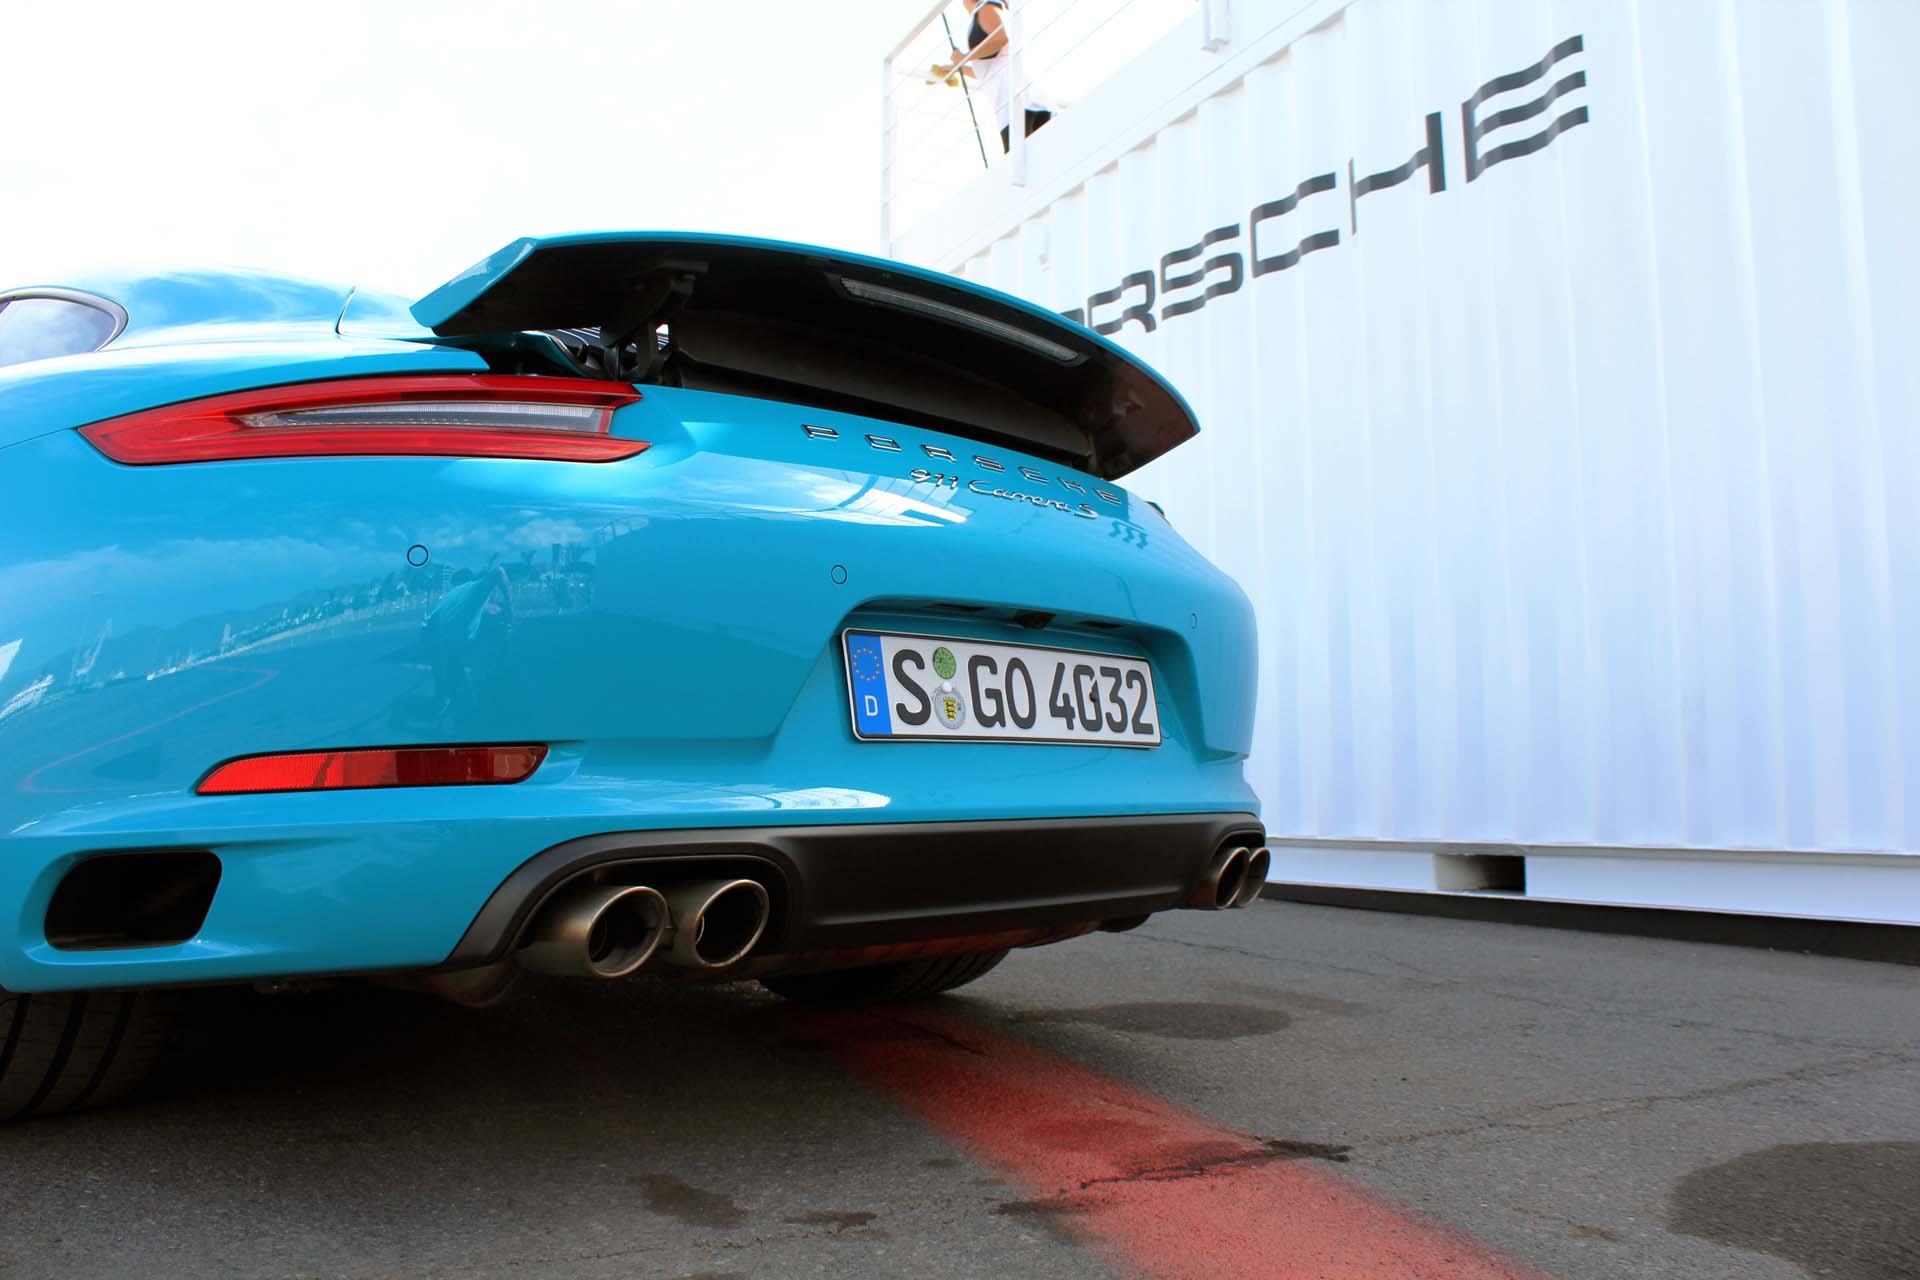 The 911’s rear spoiler deploys at 120 km/h but will rise earlier if engine needs more cooling. This Carrera S has the standard exhaust system – the pair of wide spread dual-tips are the clue.